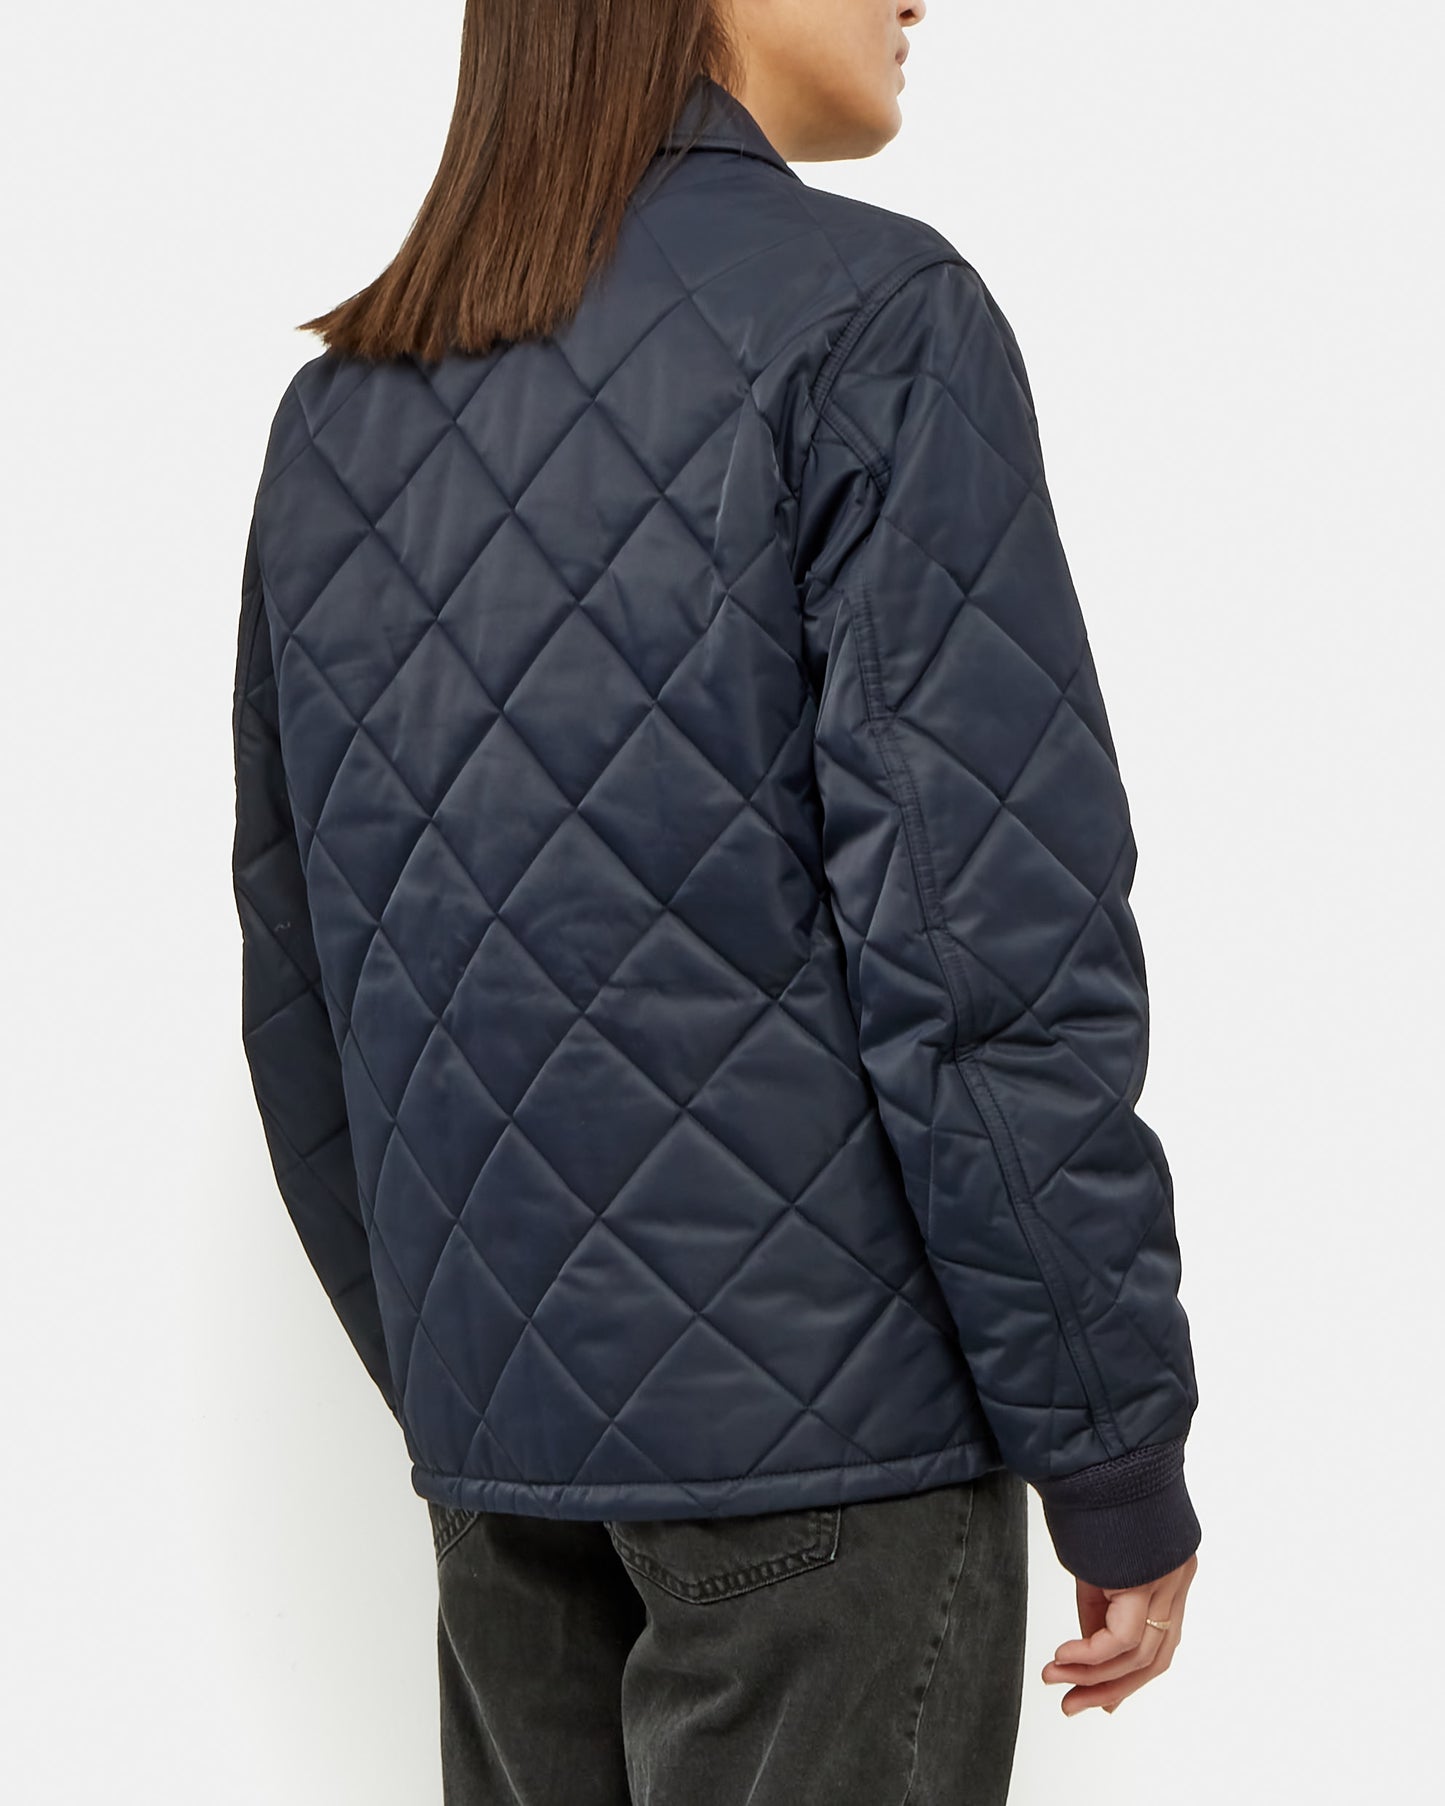 Burberry Navy Nylon Diamond Quilted Button-Up Jacket - 46 (M)